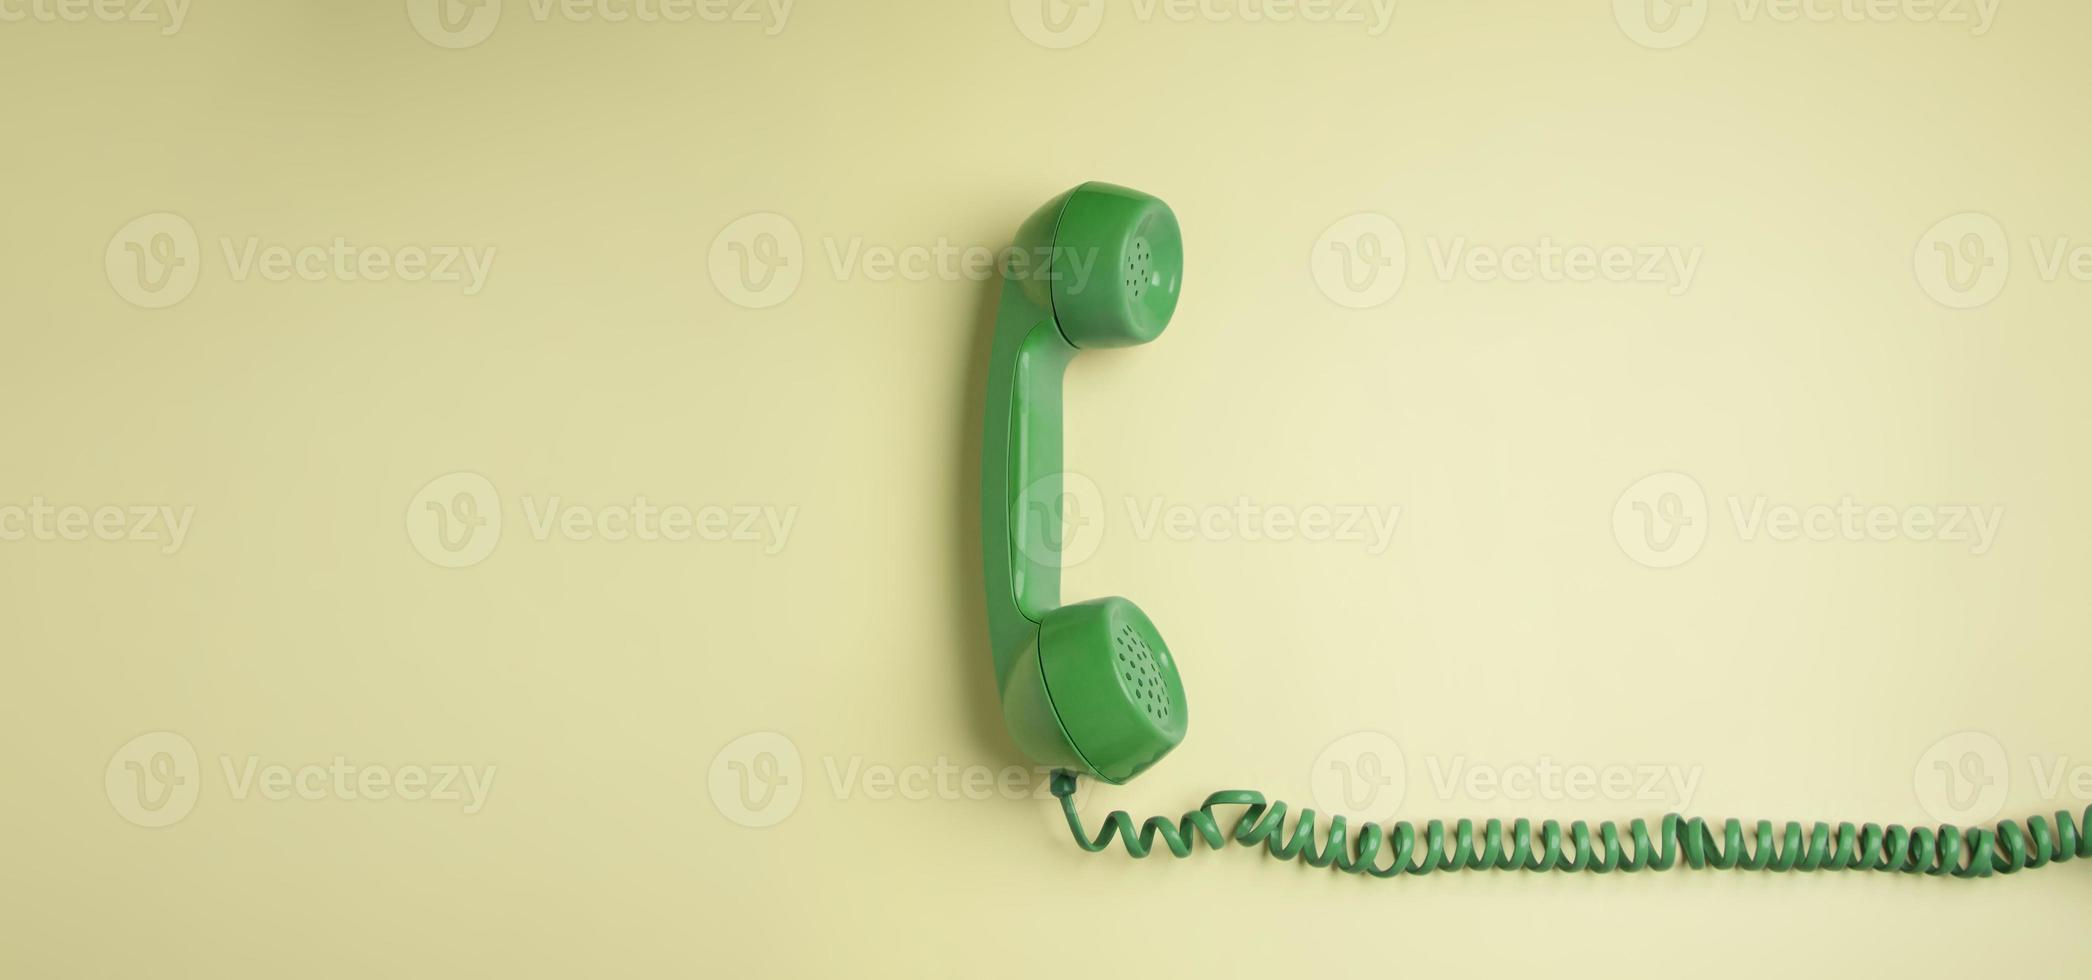 Green Vintage Retro Telephone Handset Hanfing on Pink background. Old Object from 1980-1990, Technology and Communication in the Past. Clean, Colourful  and Minimal photo